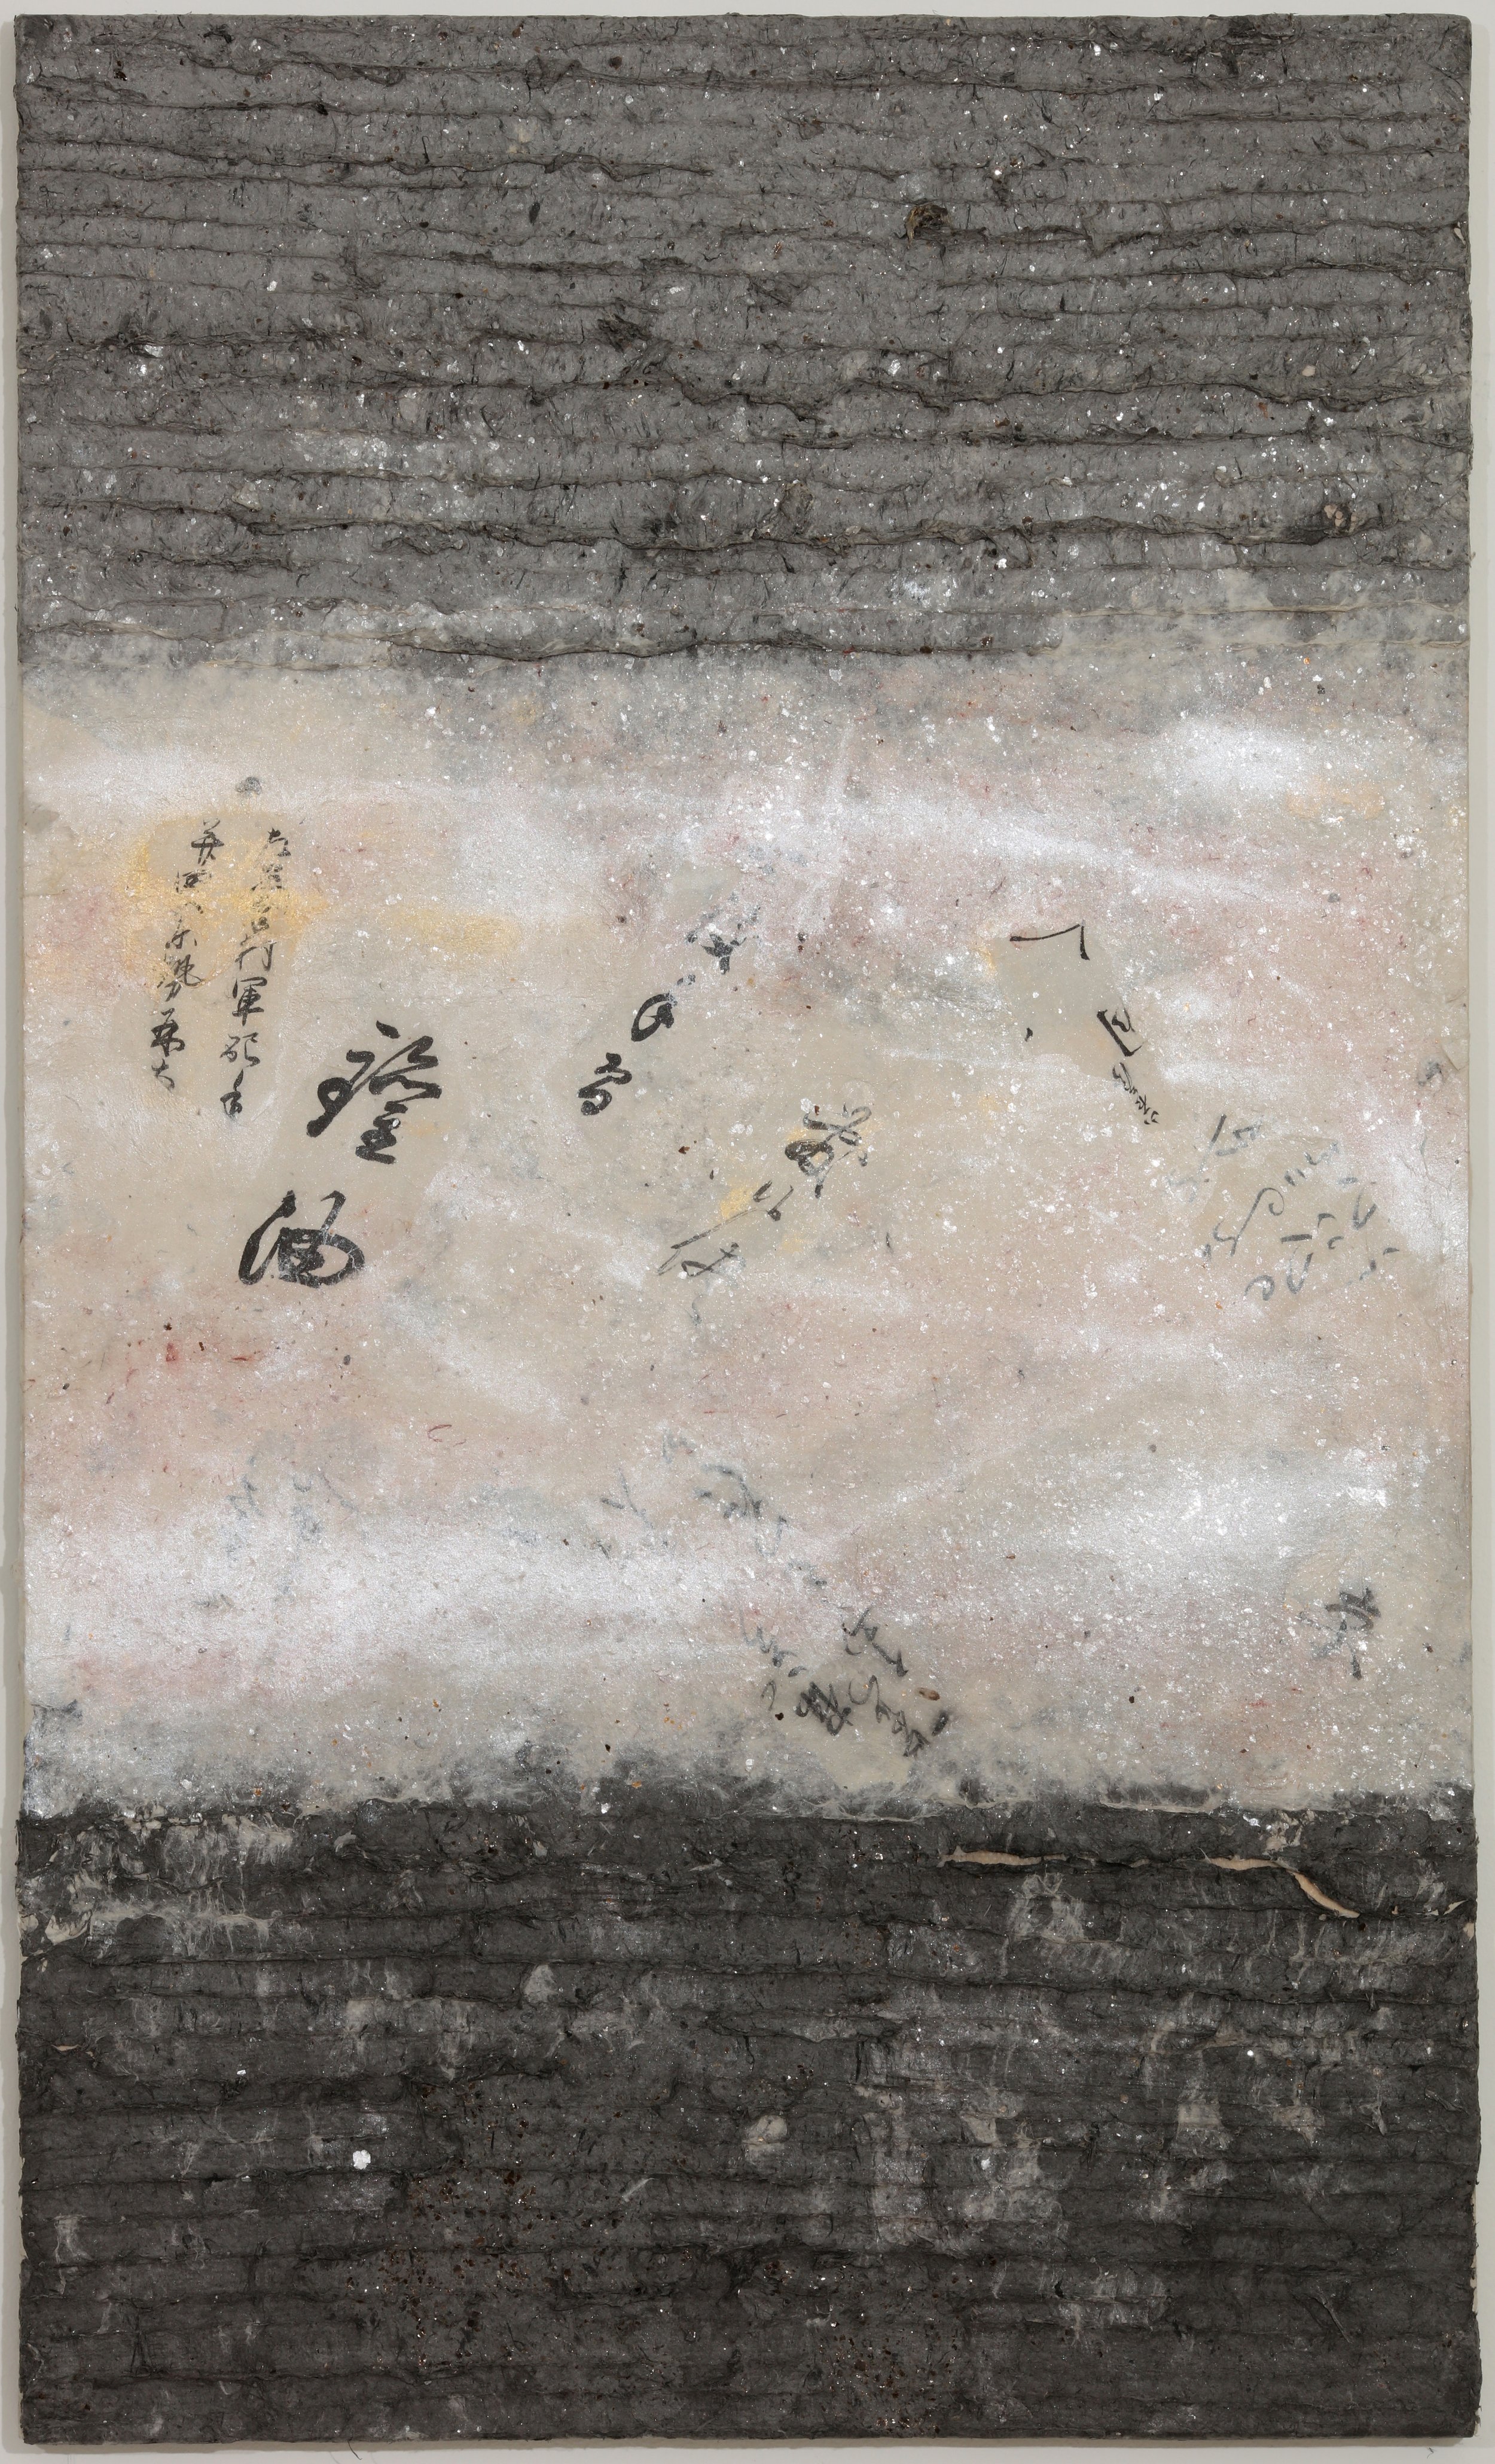  Kyoko Ibe,  Ten Chi Jin (Heaven Earth Human) , 2013. Panel, recycled ganpi paper fiber, old documents, mica and sumi, 31 x 62½ inches ©Kyoko Ibe, courtesy of Fou Gallery and Thomsen Gallery 